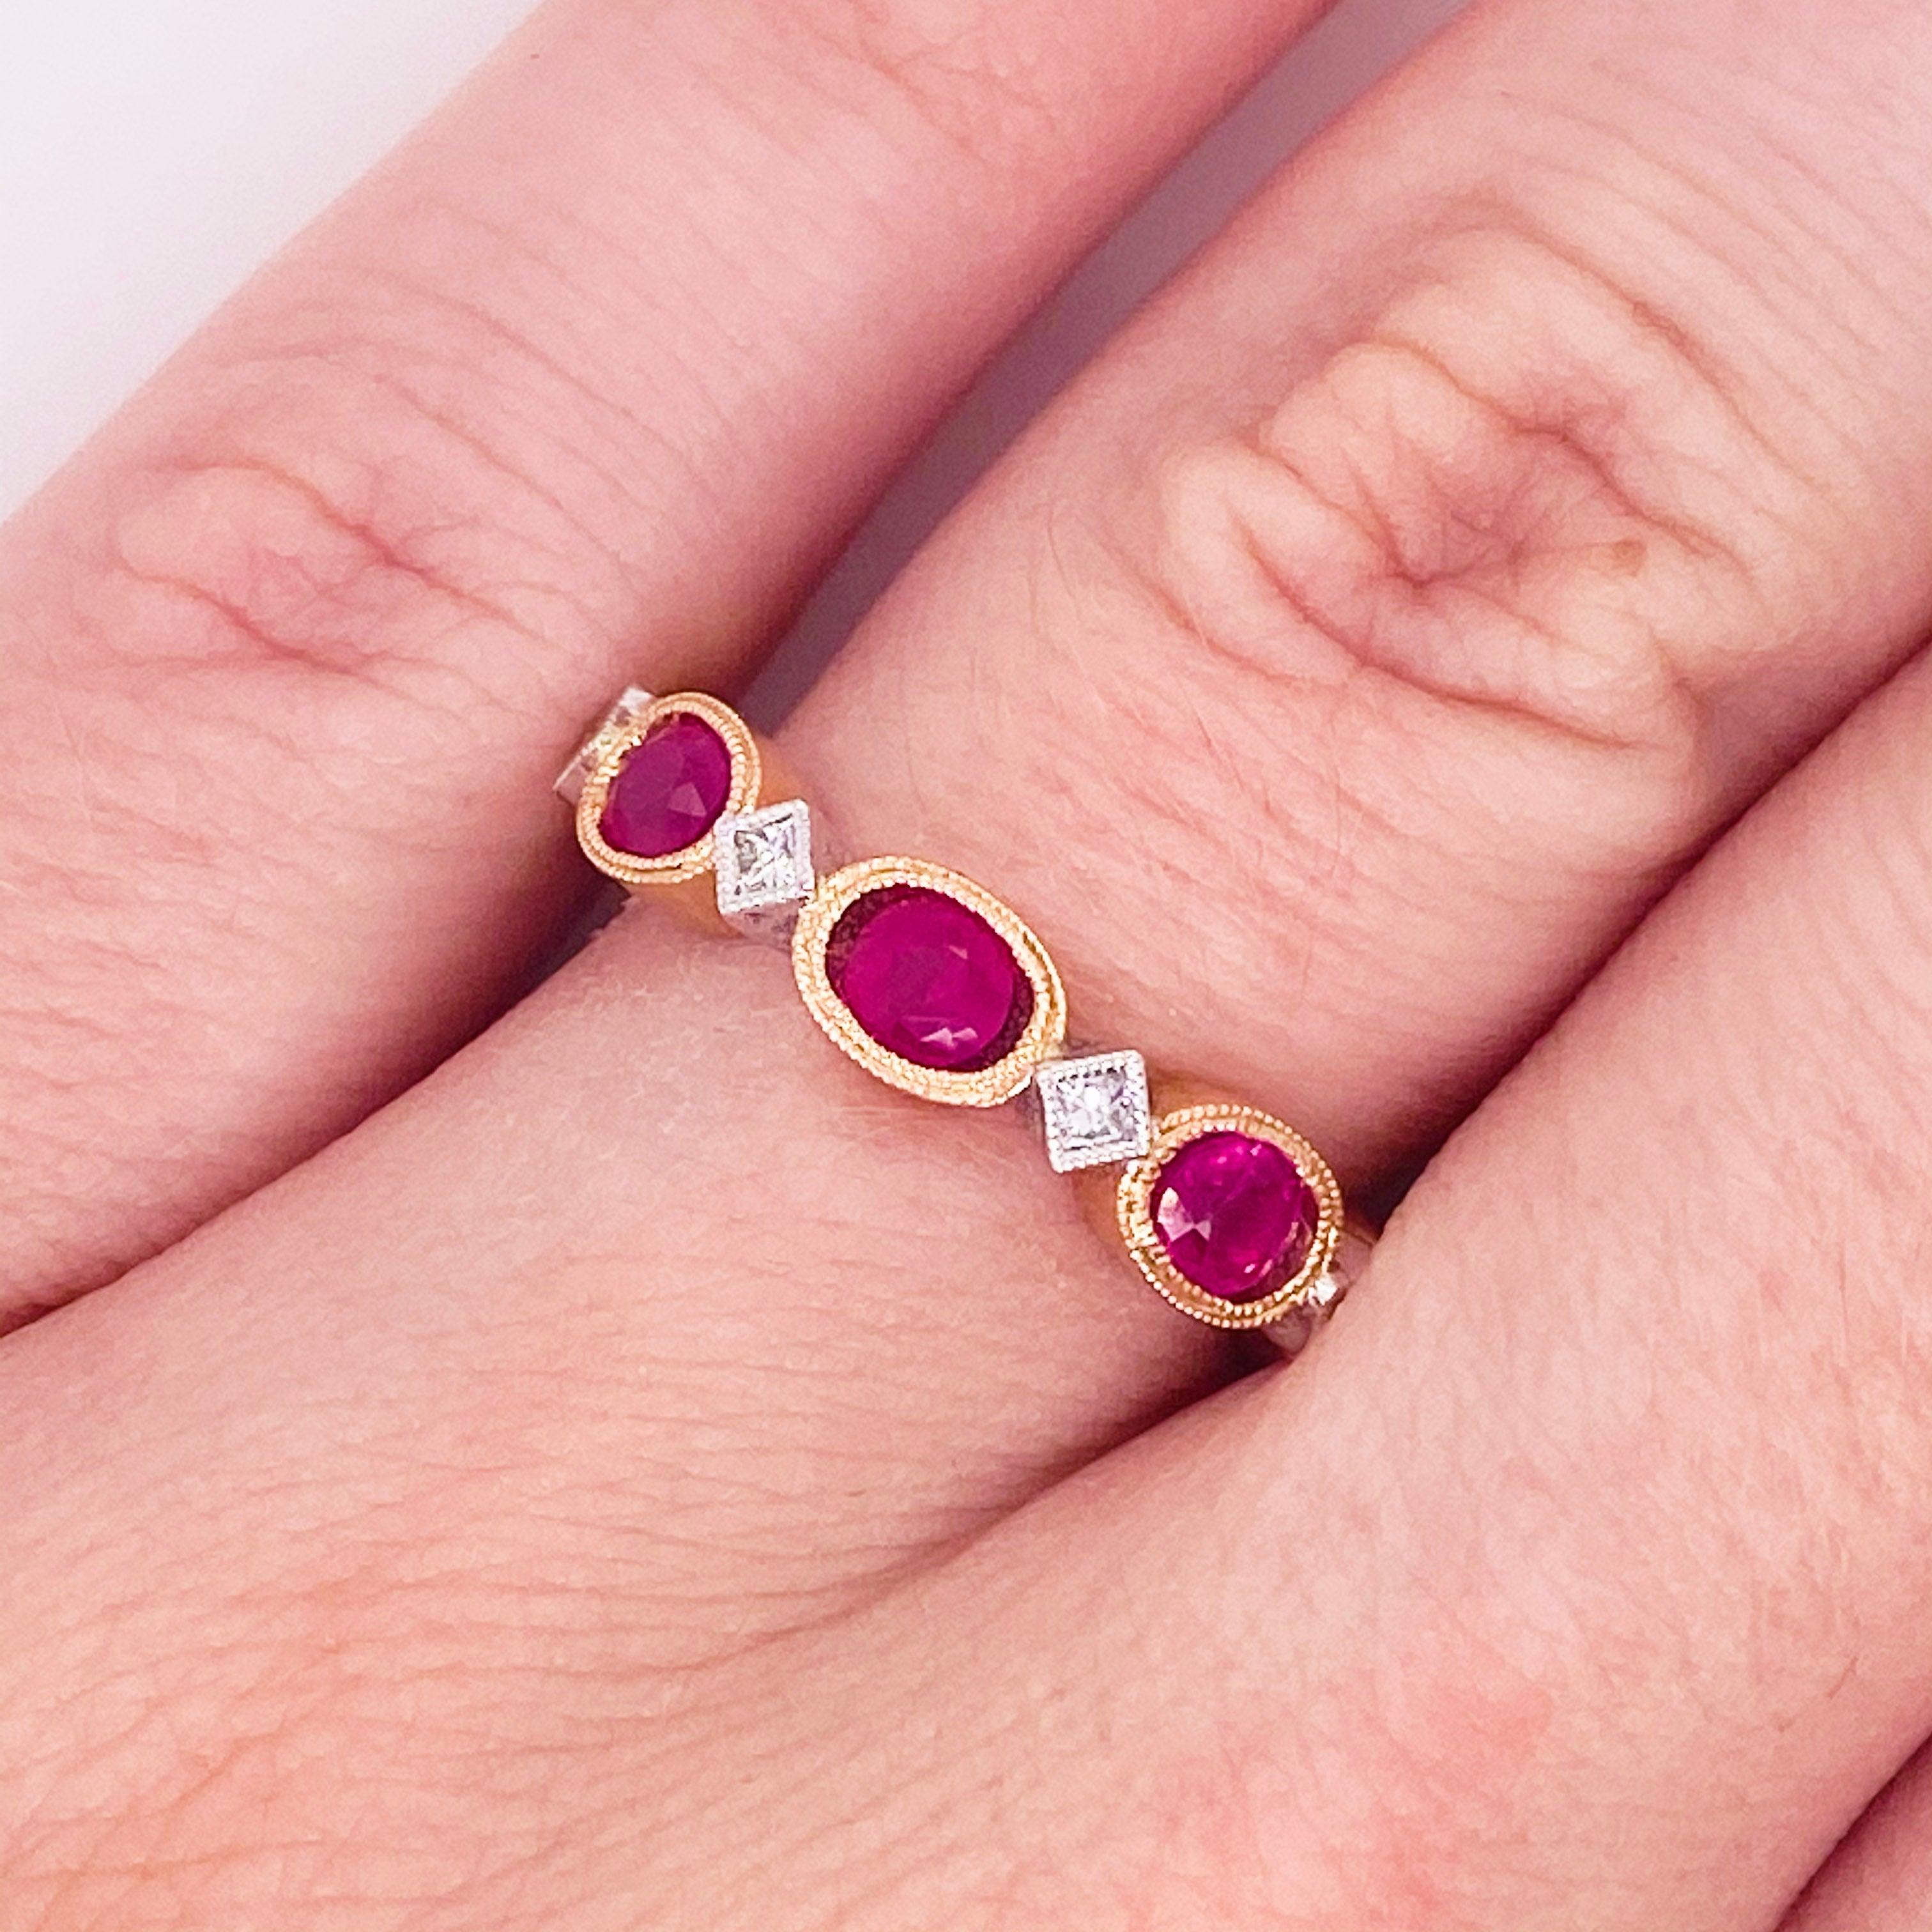 For Sale:  Ruby Diamond Ring, 14 Karat and White Gold, Stackable, Oval Ruby Wedding Band 2